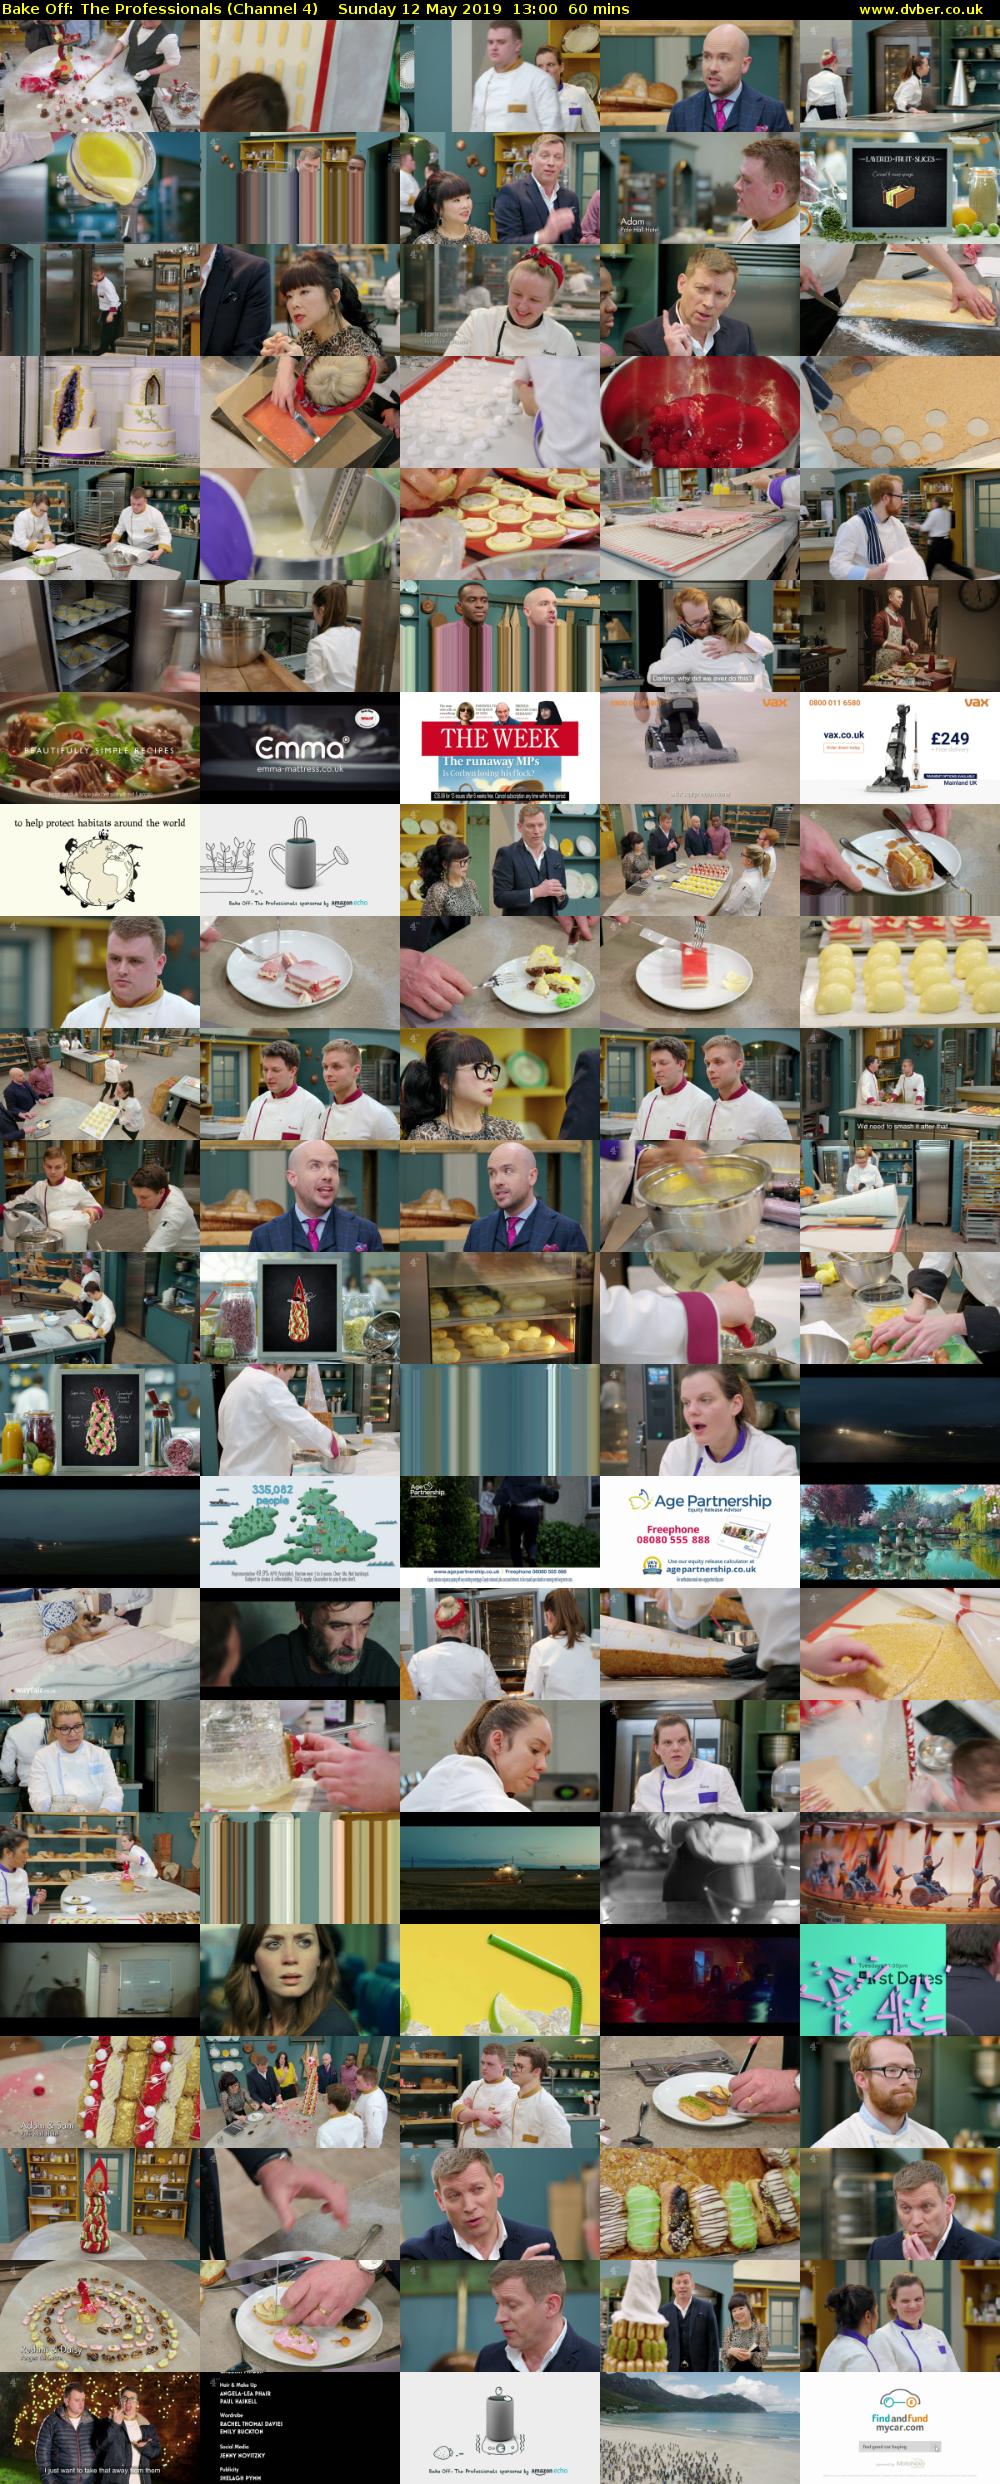 Bake Off: The Professionals (Channel 4) Sunday 12 May 2019 13:00 - 14:00